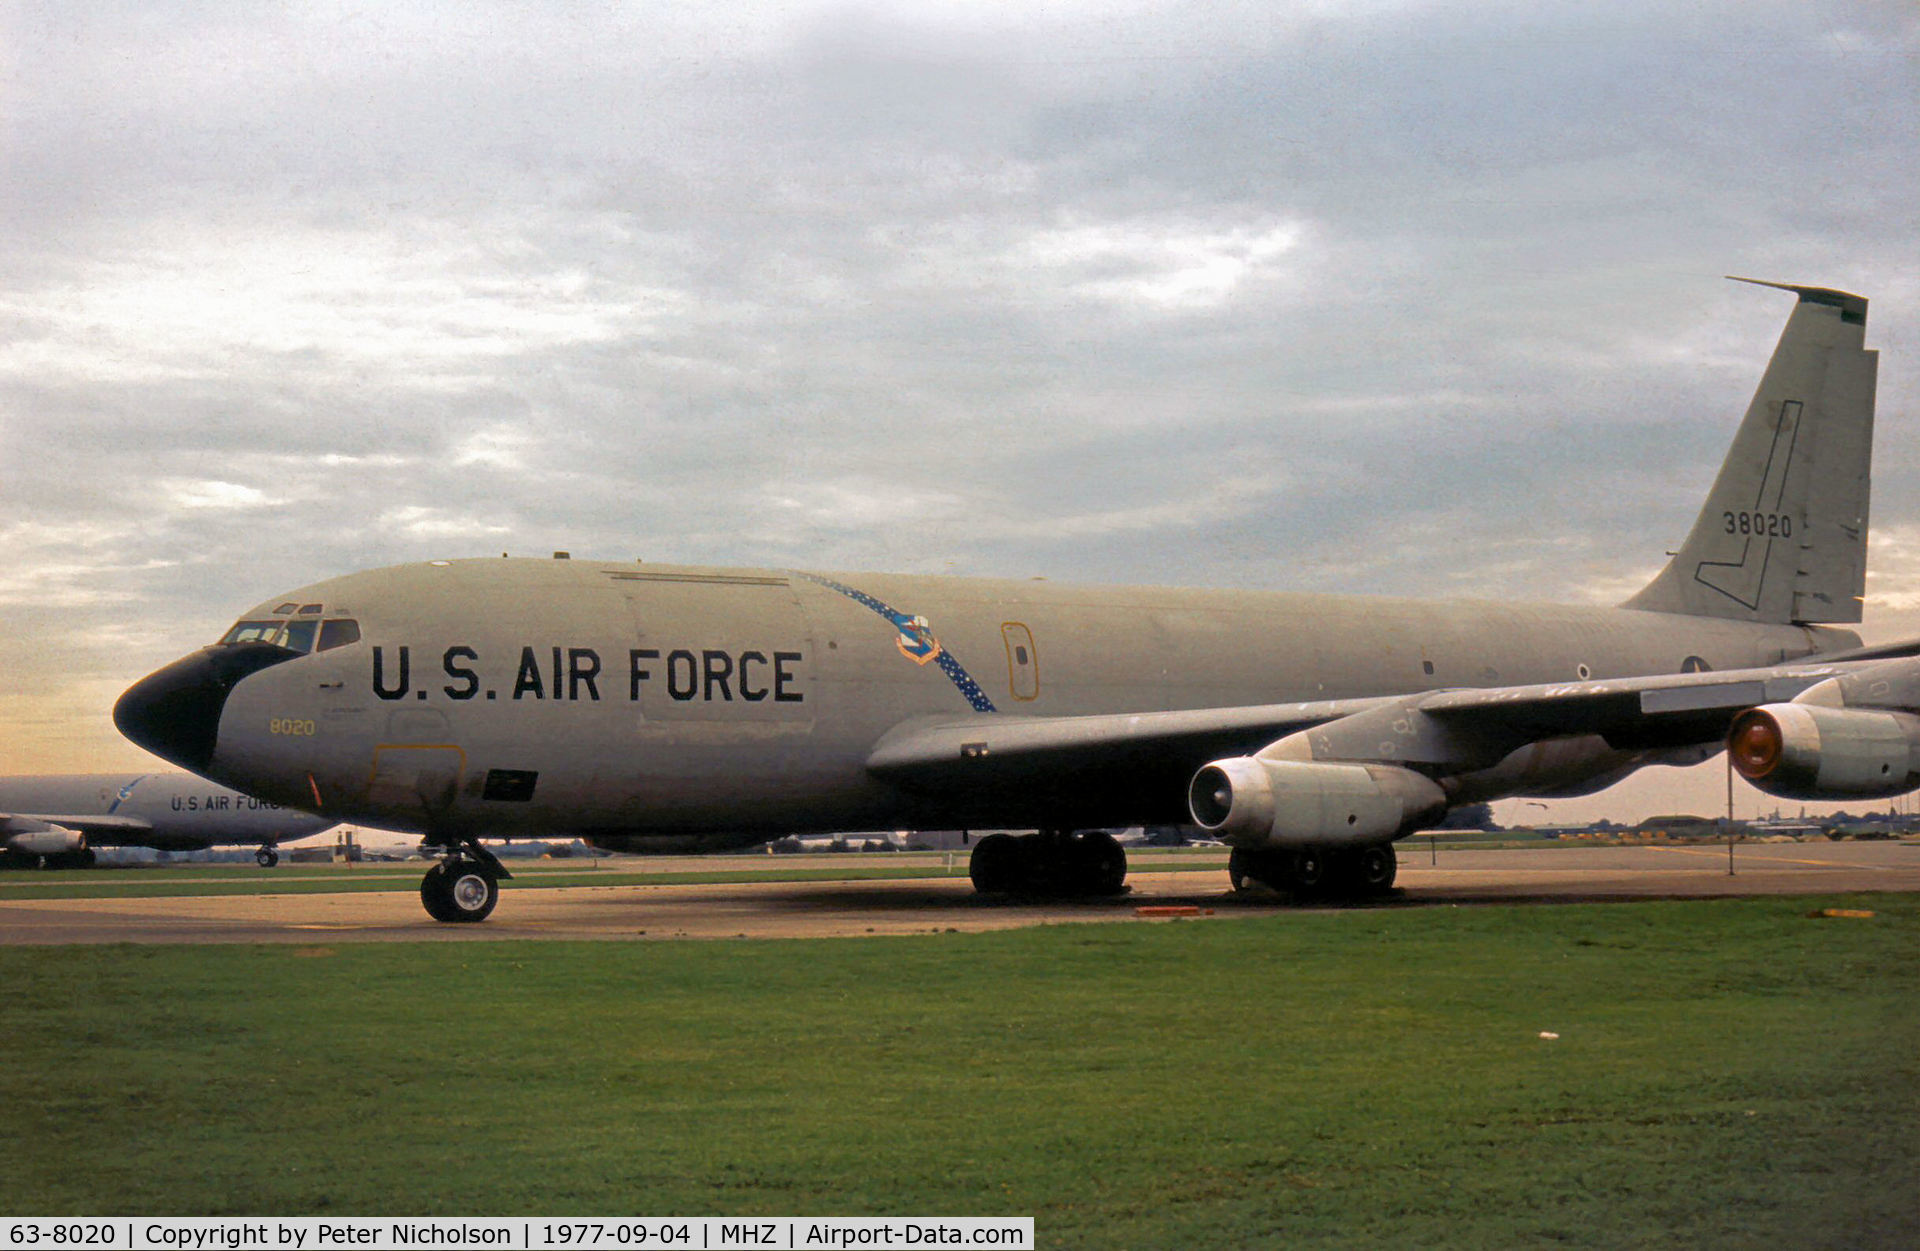 63-8020, 1963 Boeing KC-135A Stratotanker C/N 18637, KC-135A Stratotanker of the 384th Air Refuelling Wing at McConnell AFB seen at RAF Mildenhall in September 1977.